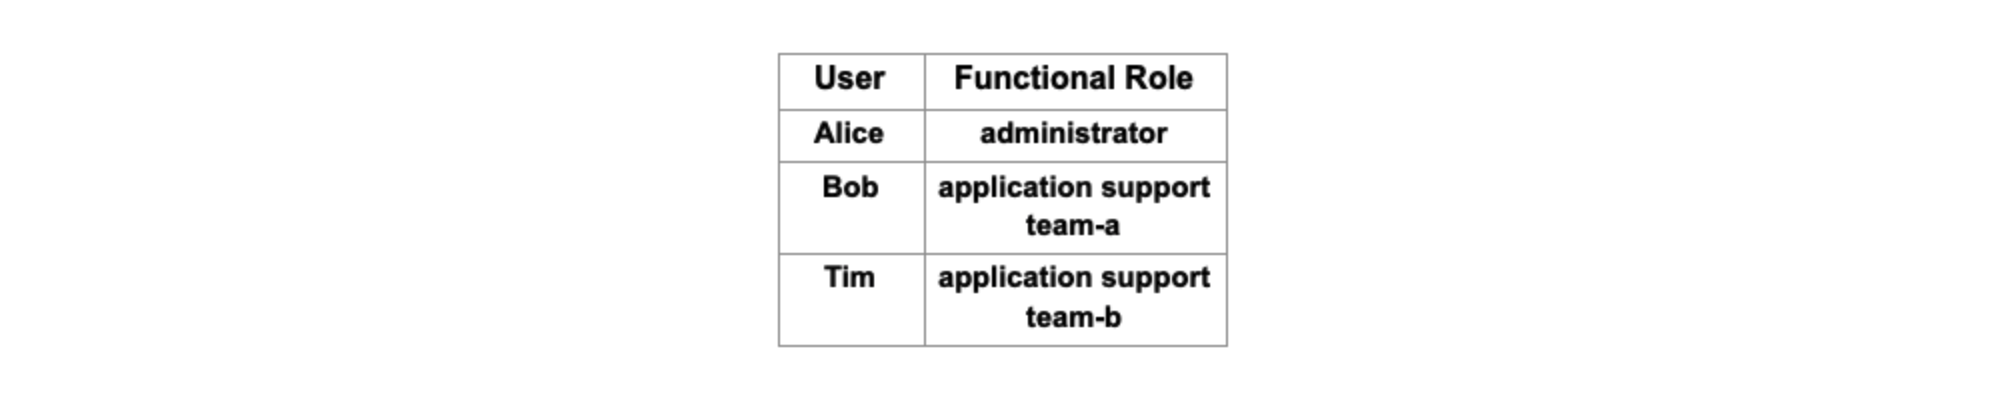 User functional role chart